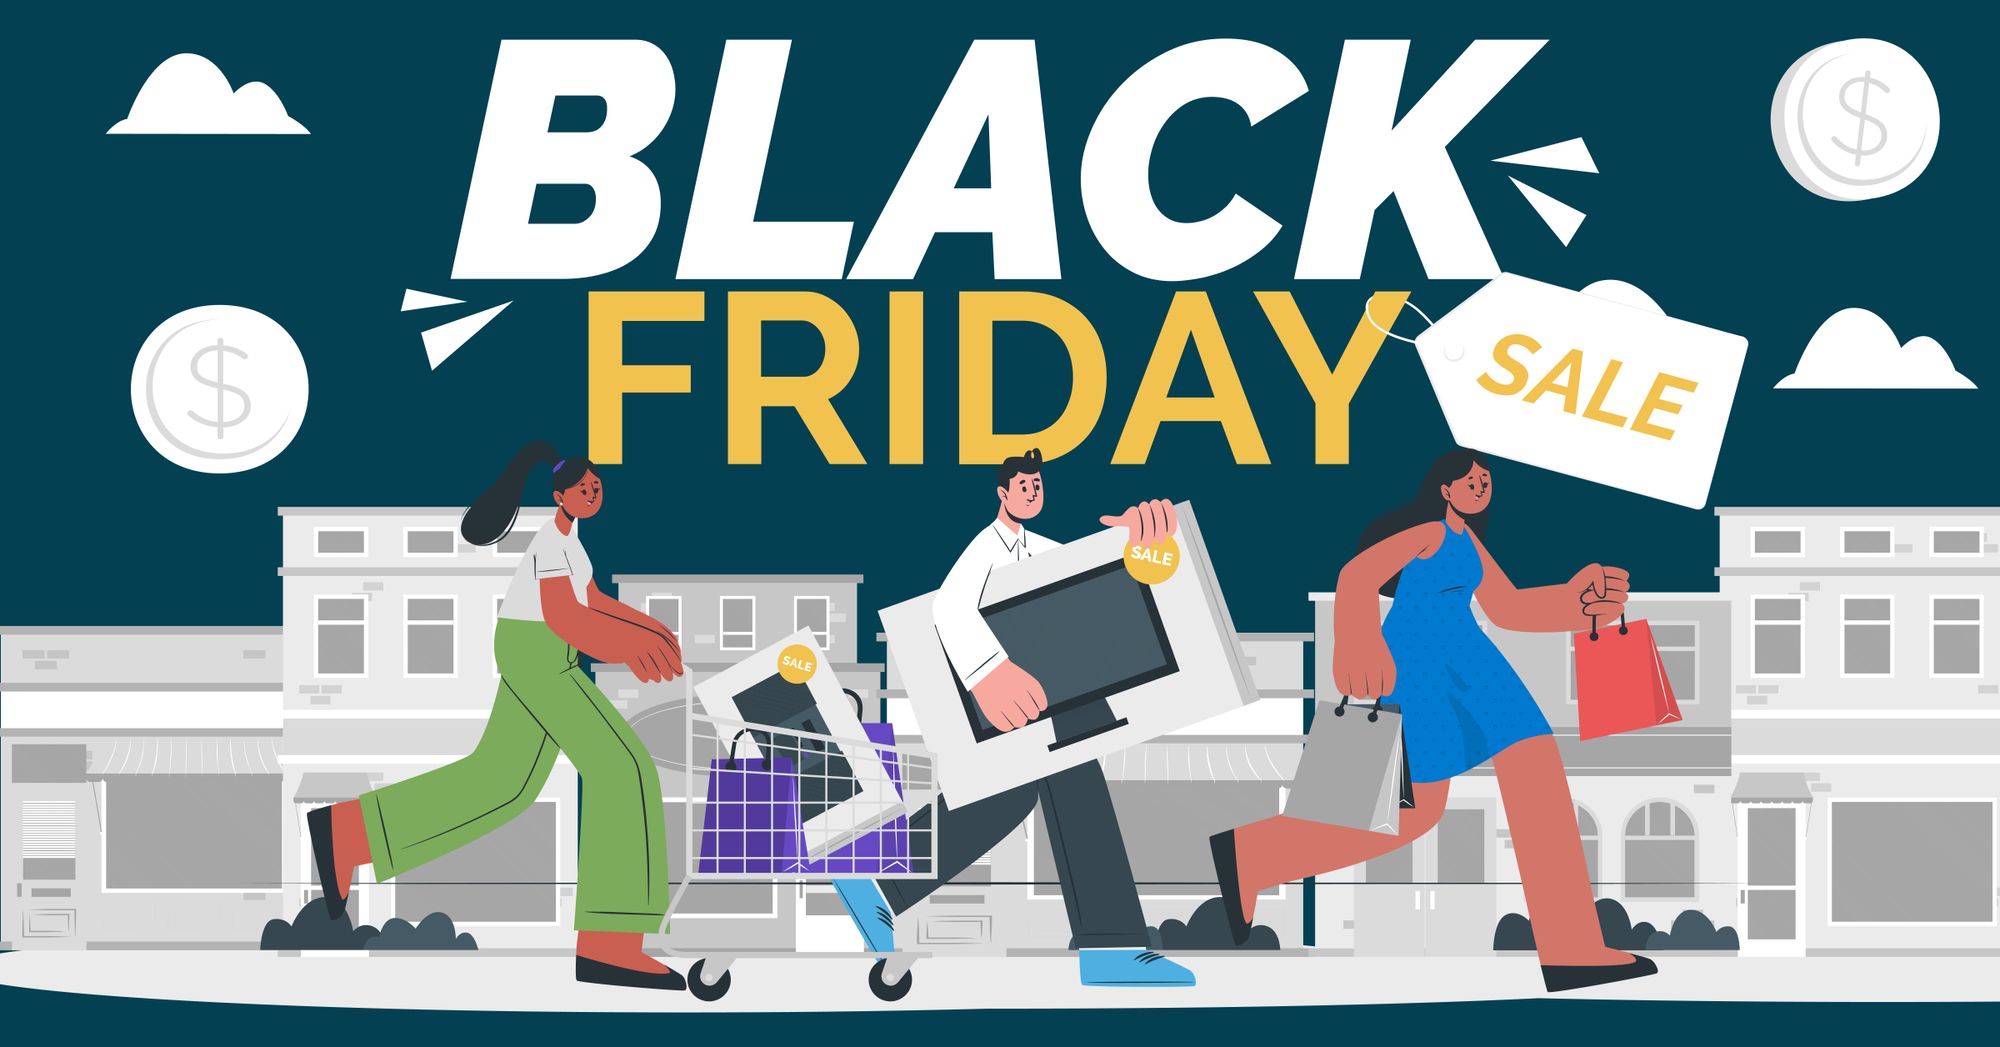 Black Friday 2021: 10 Worst Things To Buy